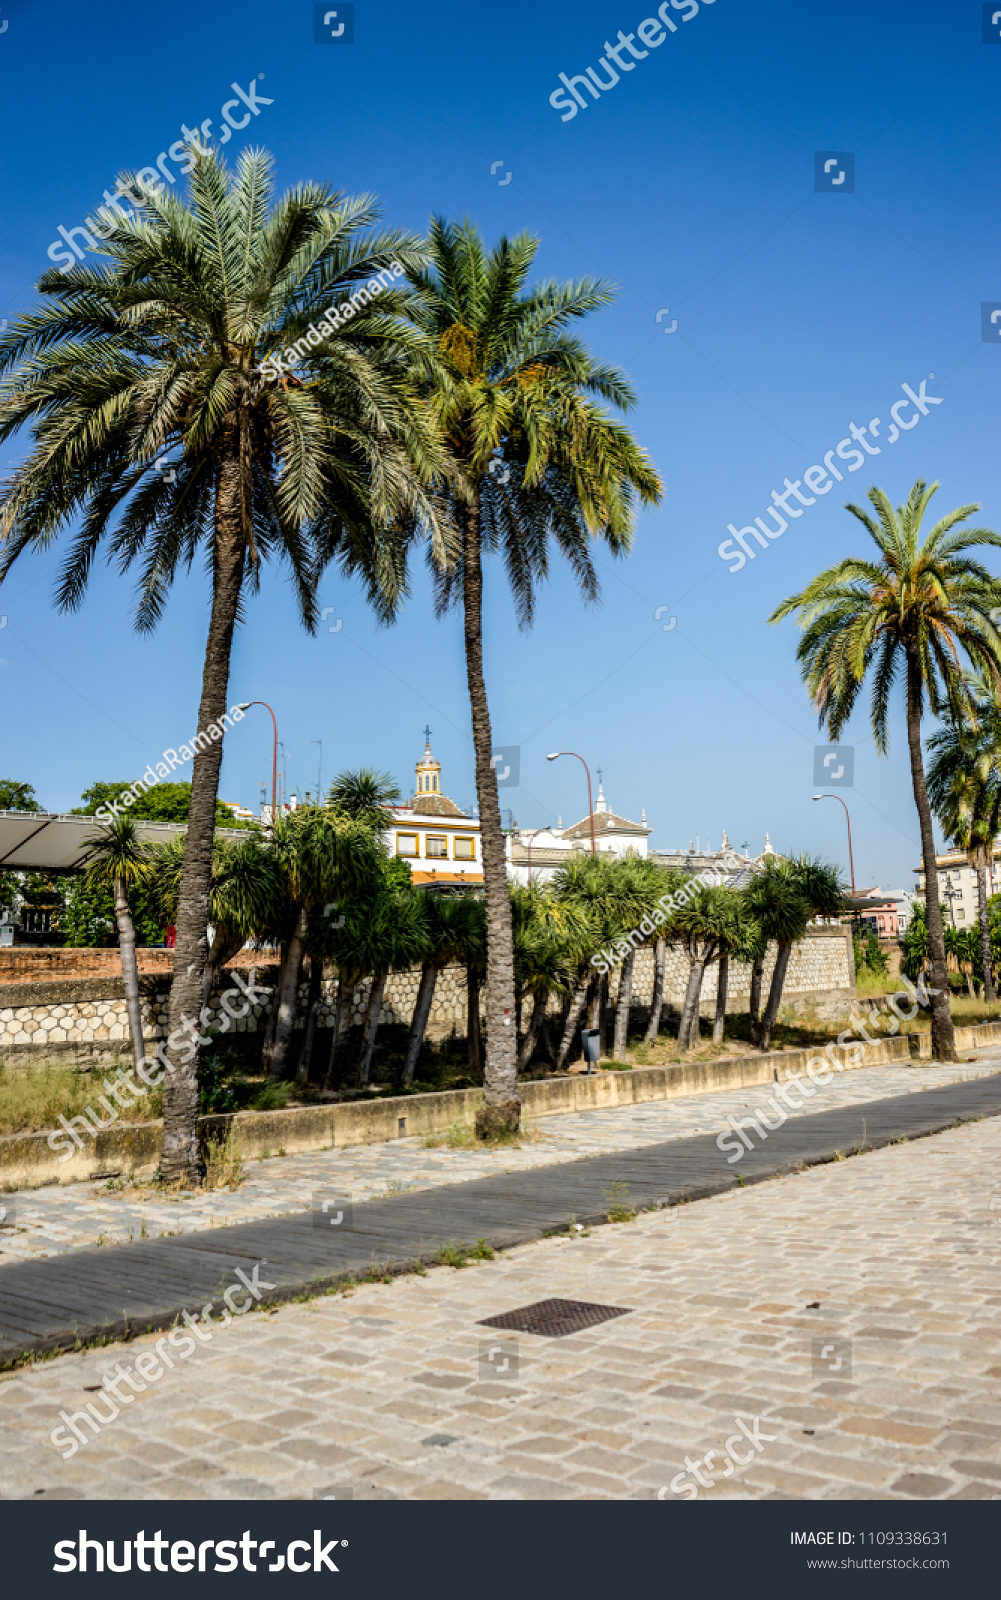 Spain, Seville, Europe,  PALM TREES BY SWIMMING POOL AGAINST SKY #1109338631